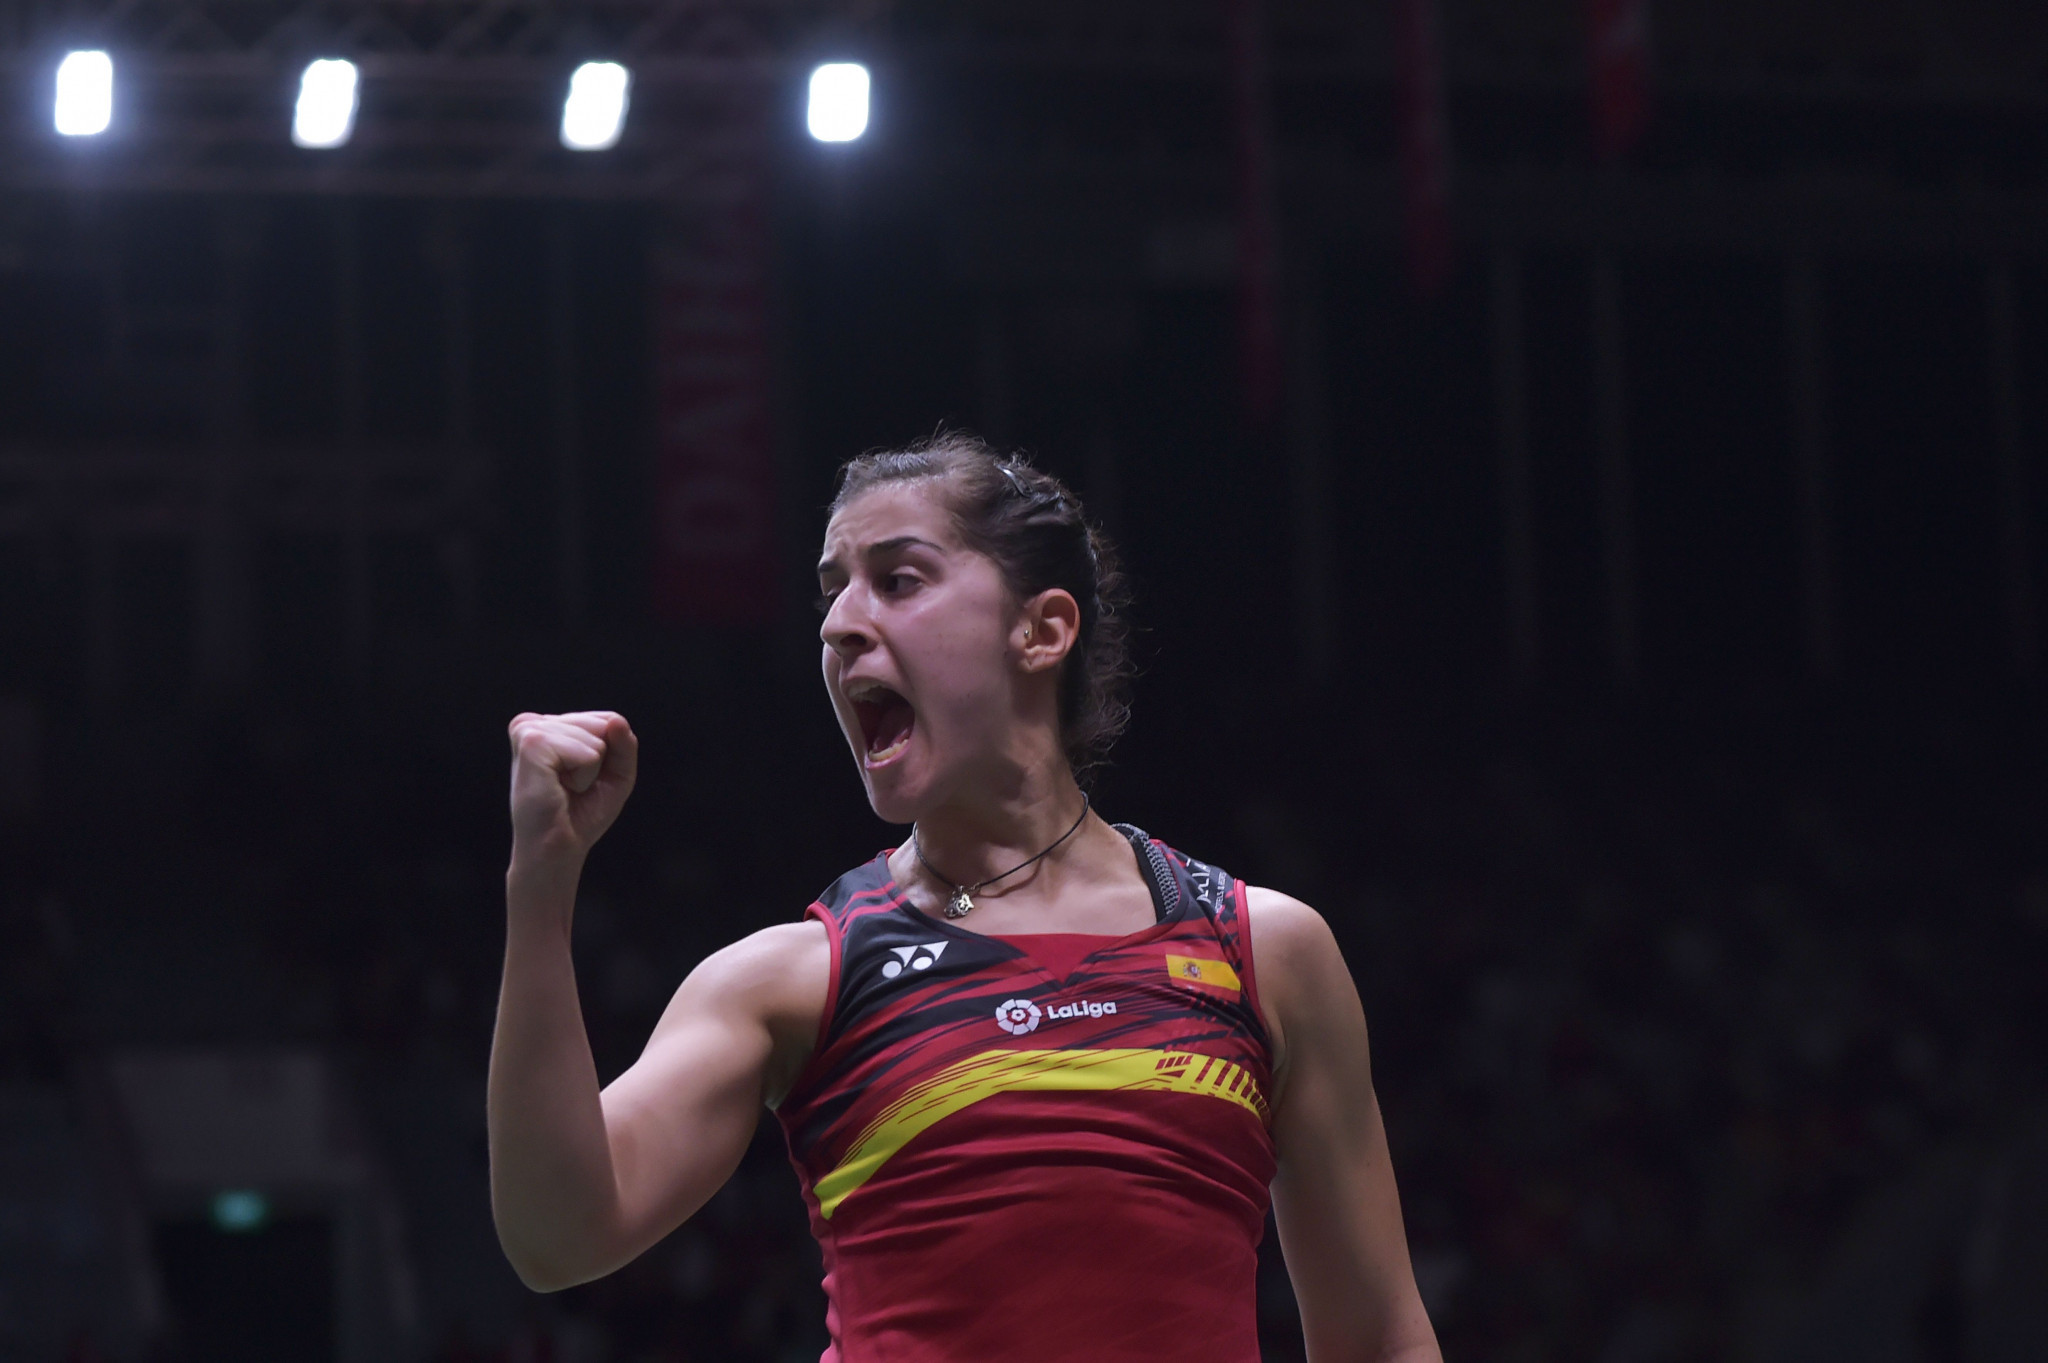 Top seed Carolina Marín is through to the final of the women's singles event at the European Badminton Championships at a venue in Huelva named after her ©Getty Images